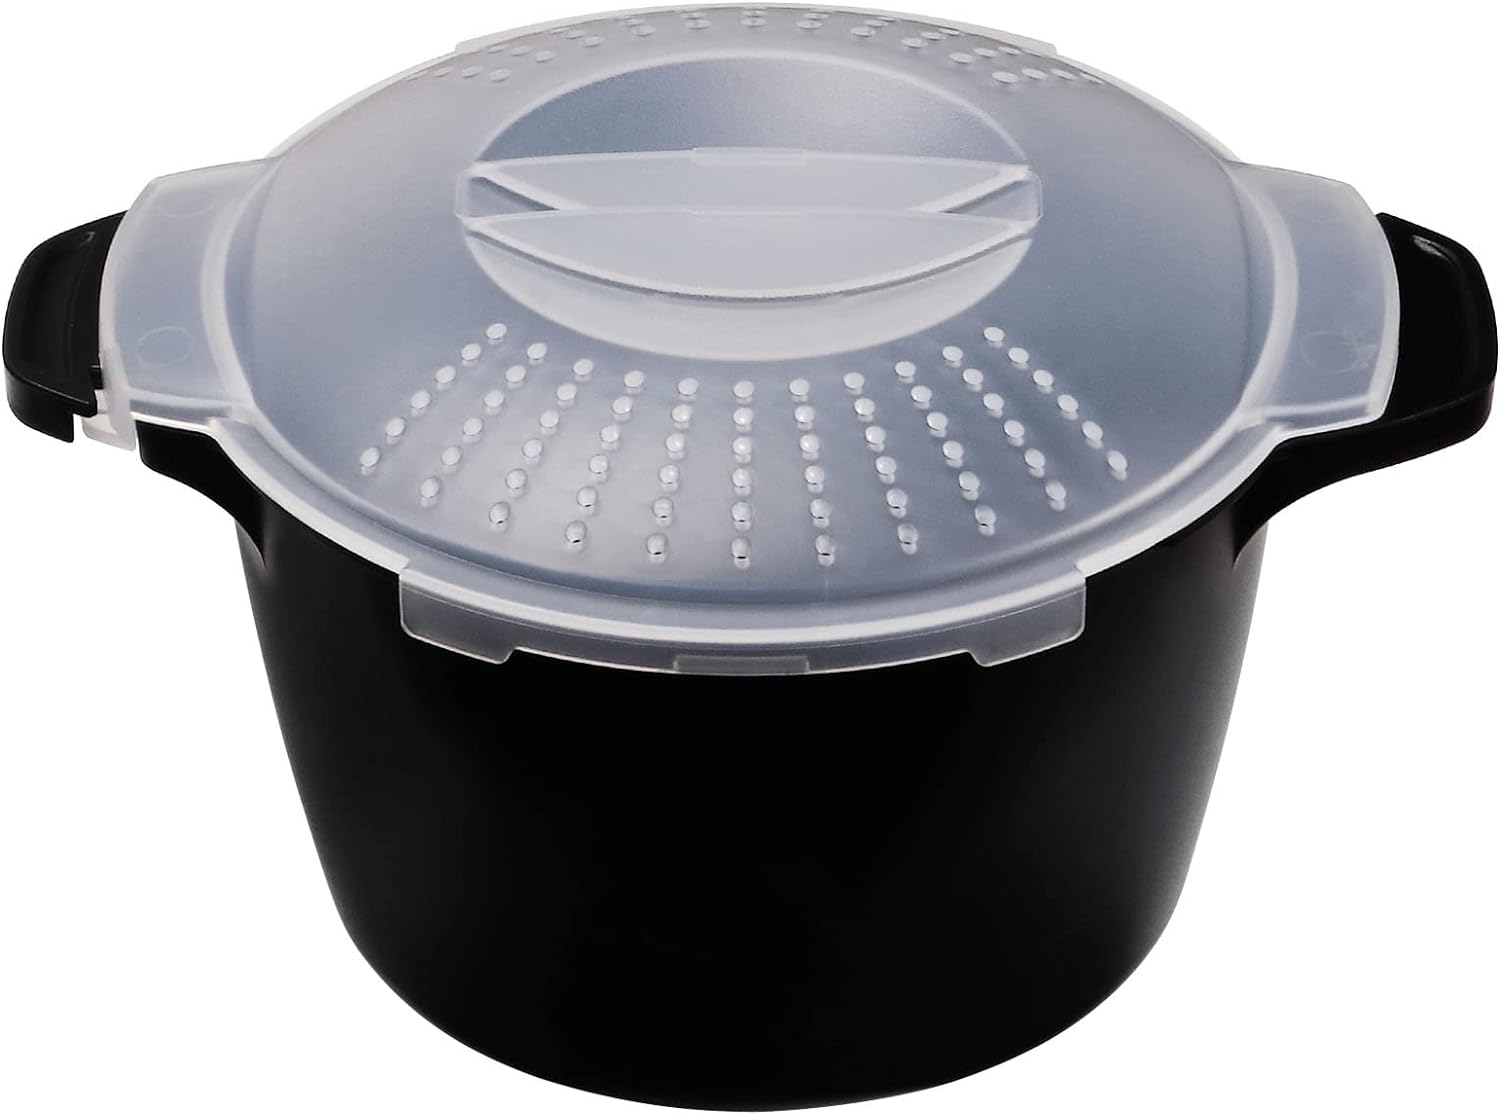 professional large micro cookware